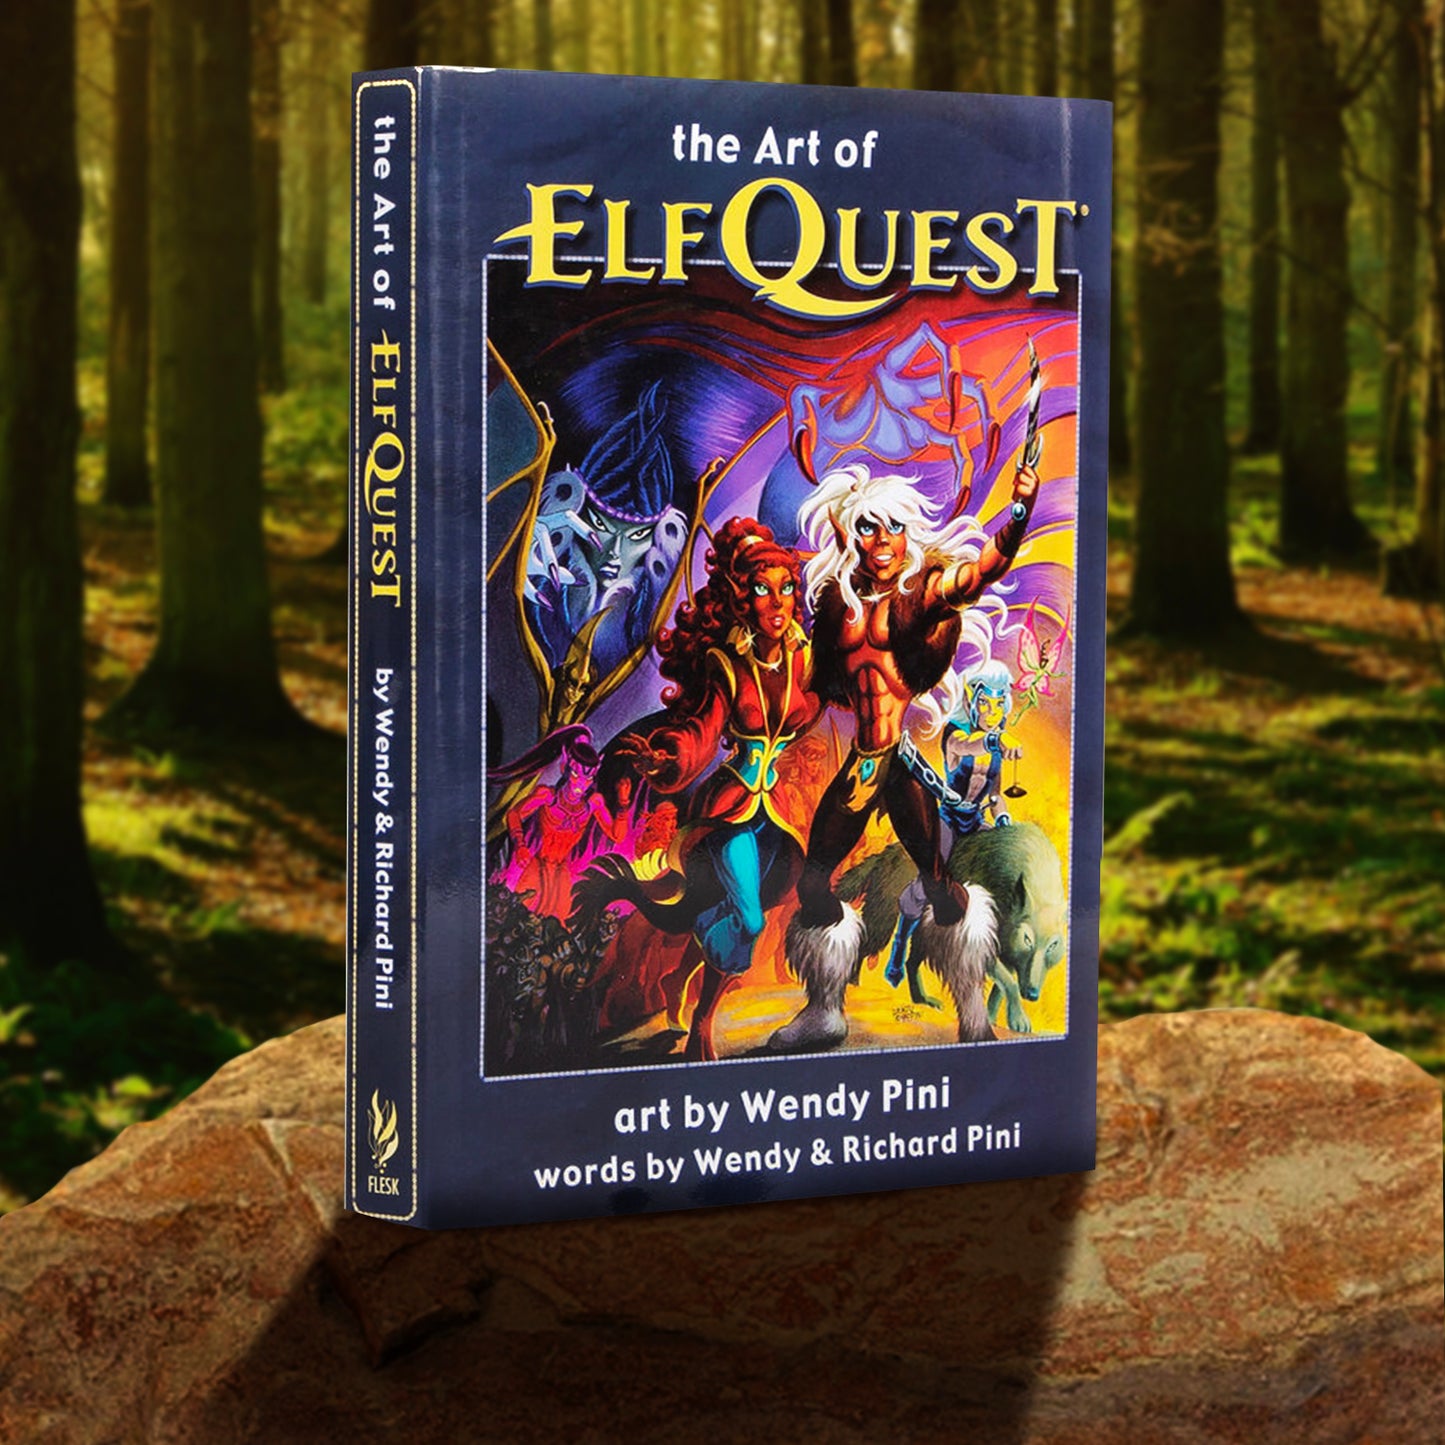 A copy of "The Art of ElfQuest: art by Wendy Pini, words by Wendy & Richard Pini" depicted in a forest setting. The cover is a dark purple-blue and features ElfQuest characters on the front. 